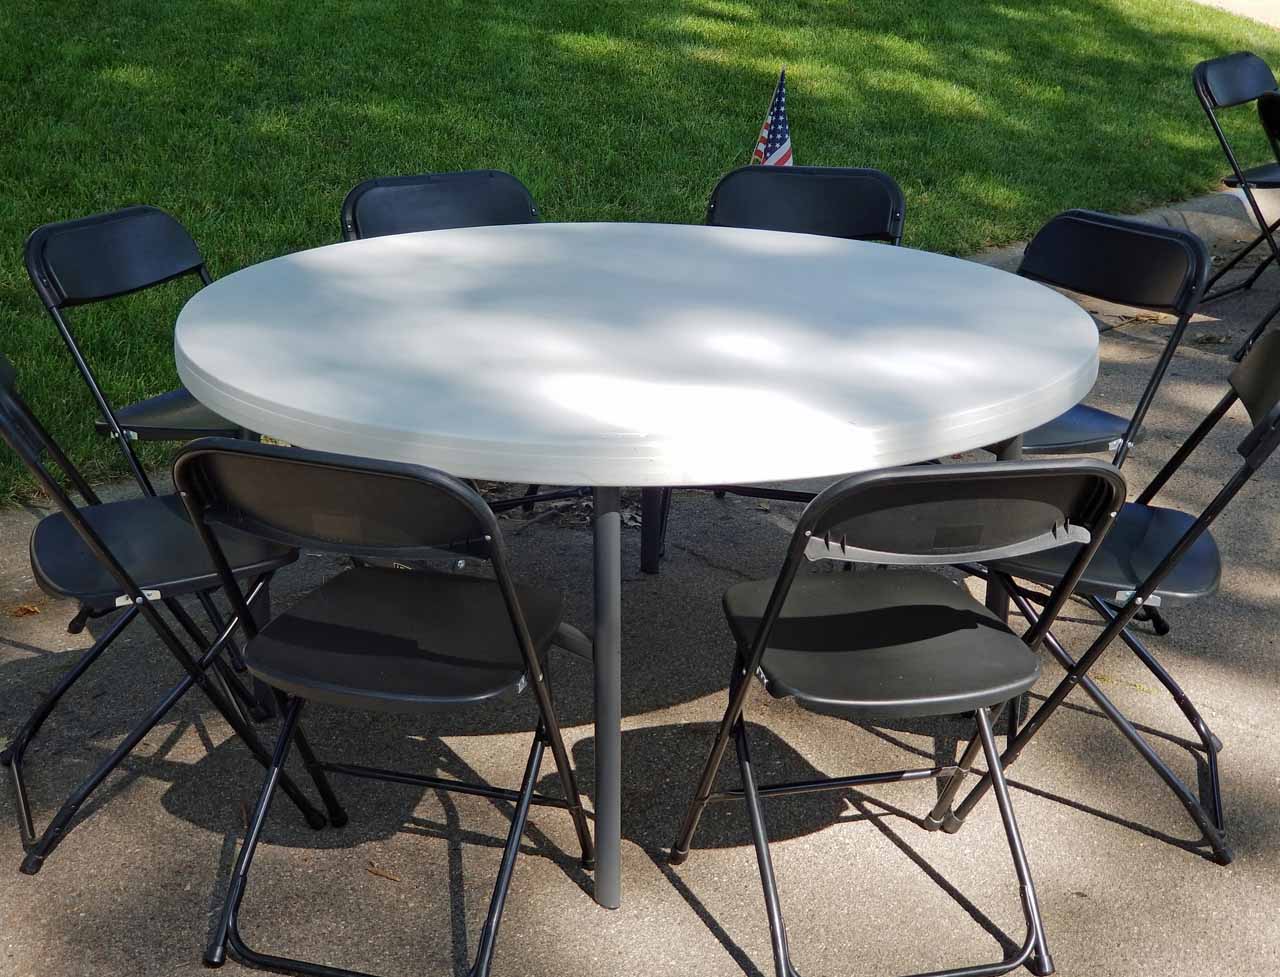 Advantages of outdoor folding tables and chairs